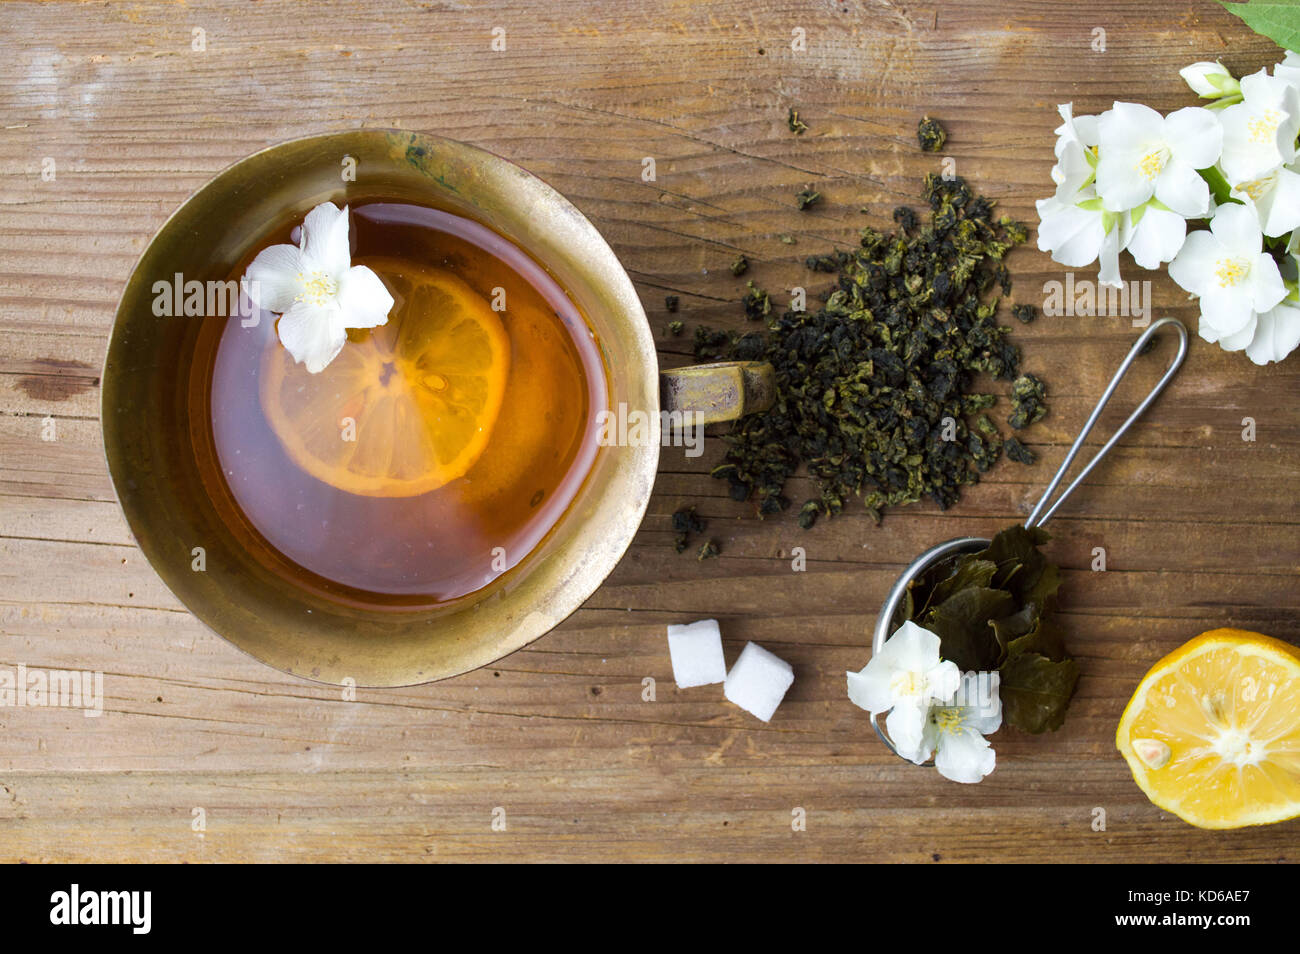 Green and jasmine tea mixture in a cup for a healthy beverage Stock Photo